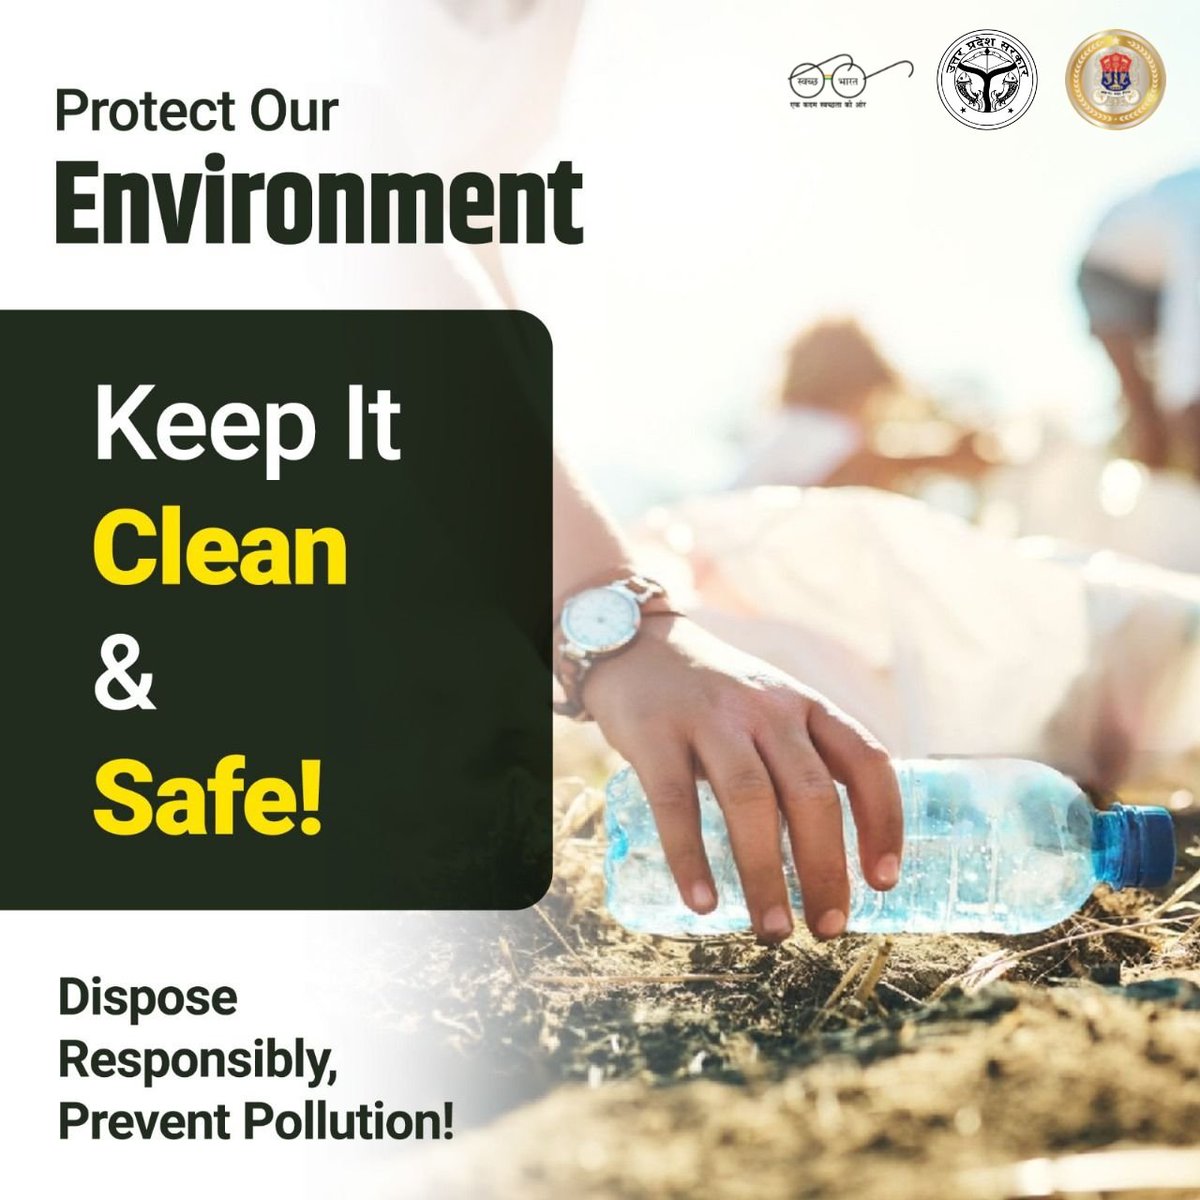 Waste-free living is the new black! 🌿 Let's protect our environment and keep it clean for future generations. #ProtectOurPlanet #ZeroWaste
@SBM_UP 
@ChiefSecyUP 
@CMOfficeUP 
@LkoSmartCity